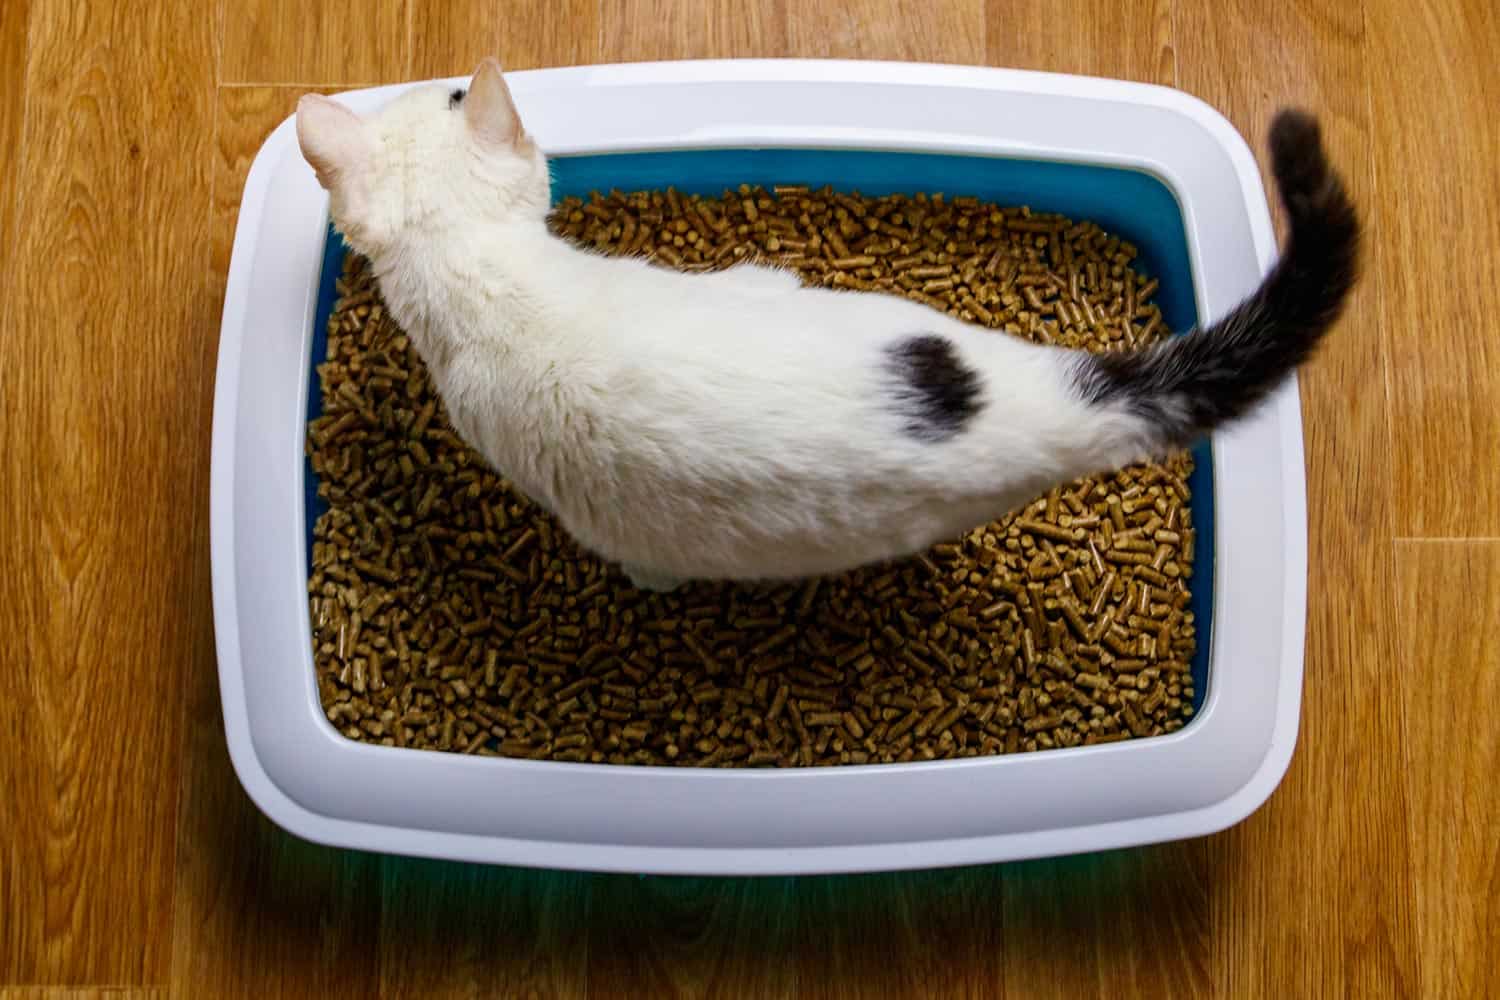 White cat in cat's litter box - from article how to remove clumping litter from cat's paw